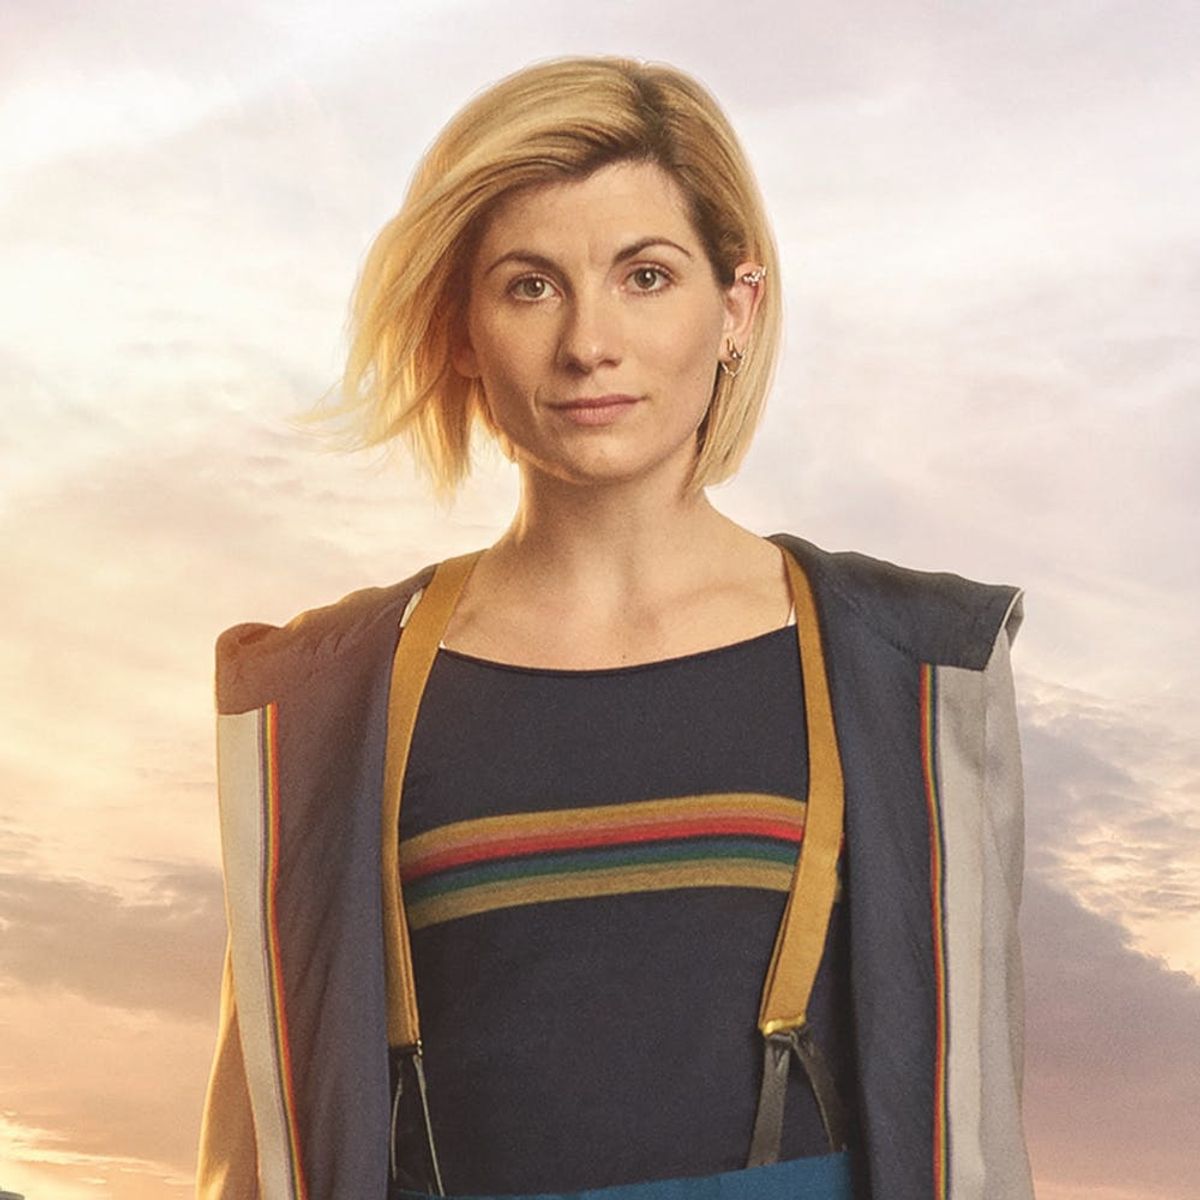 See Jodie Whittaker as the First Female Doctor Who in This New Trailer